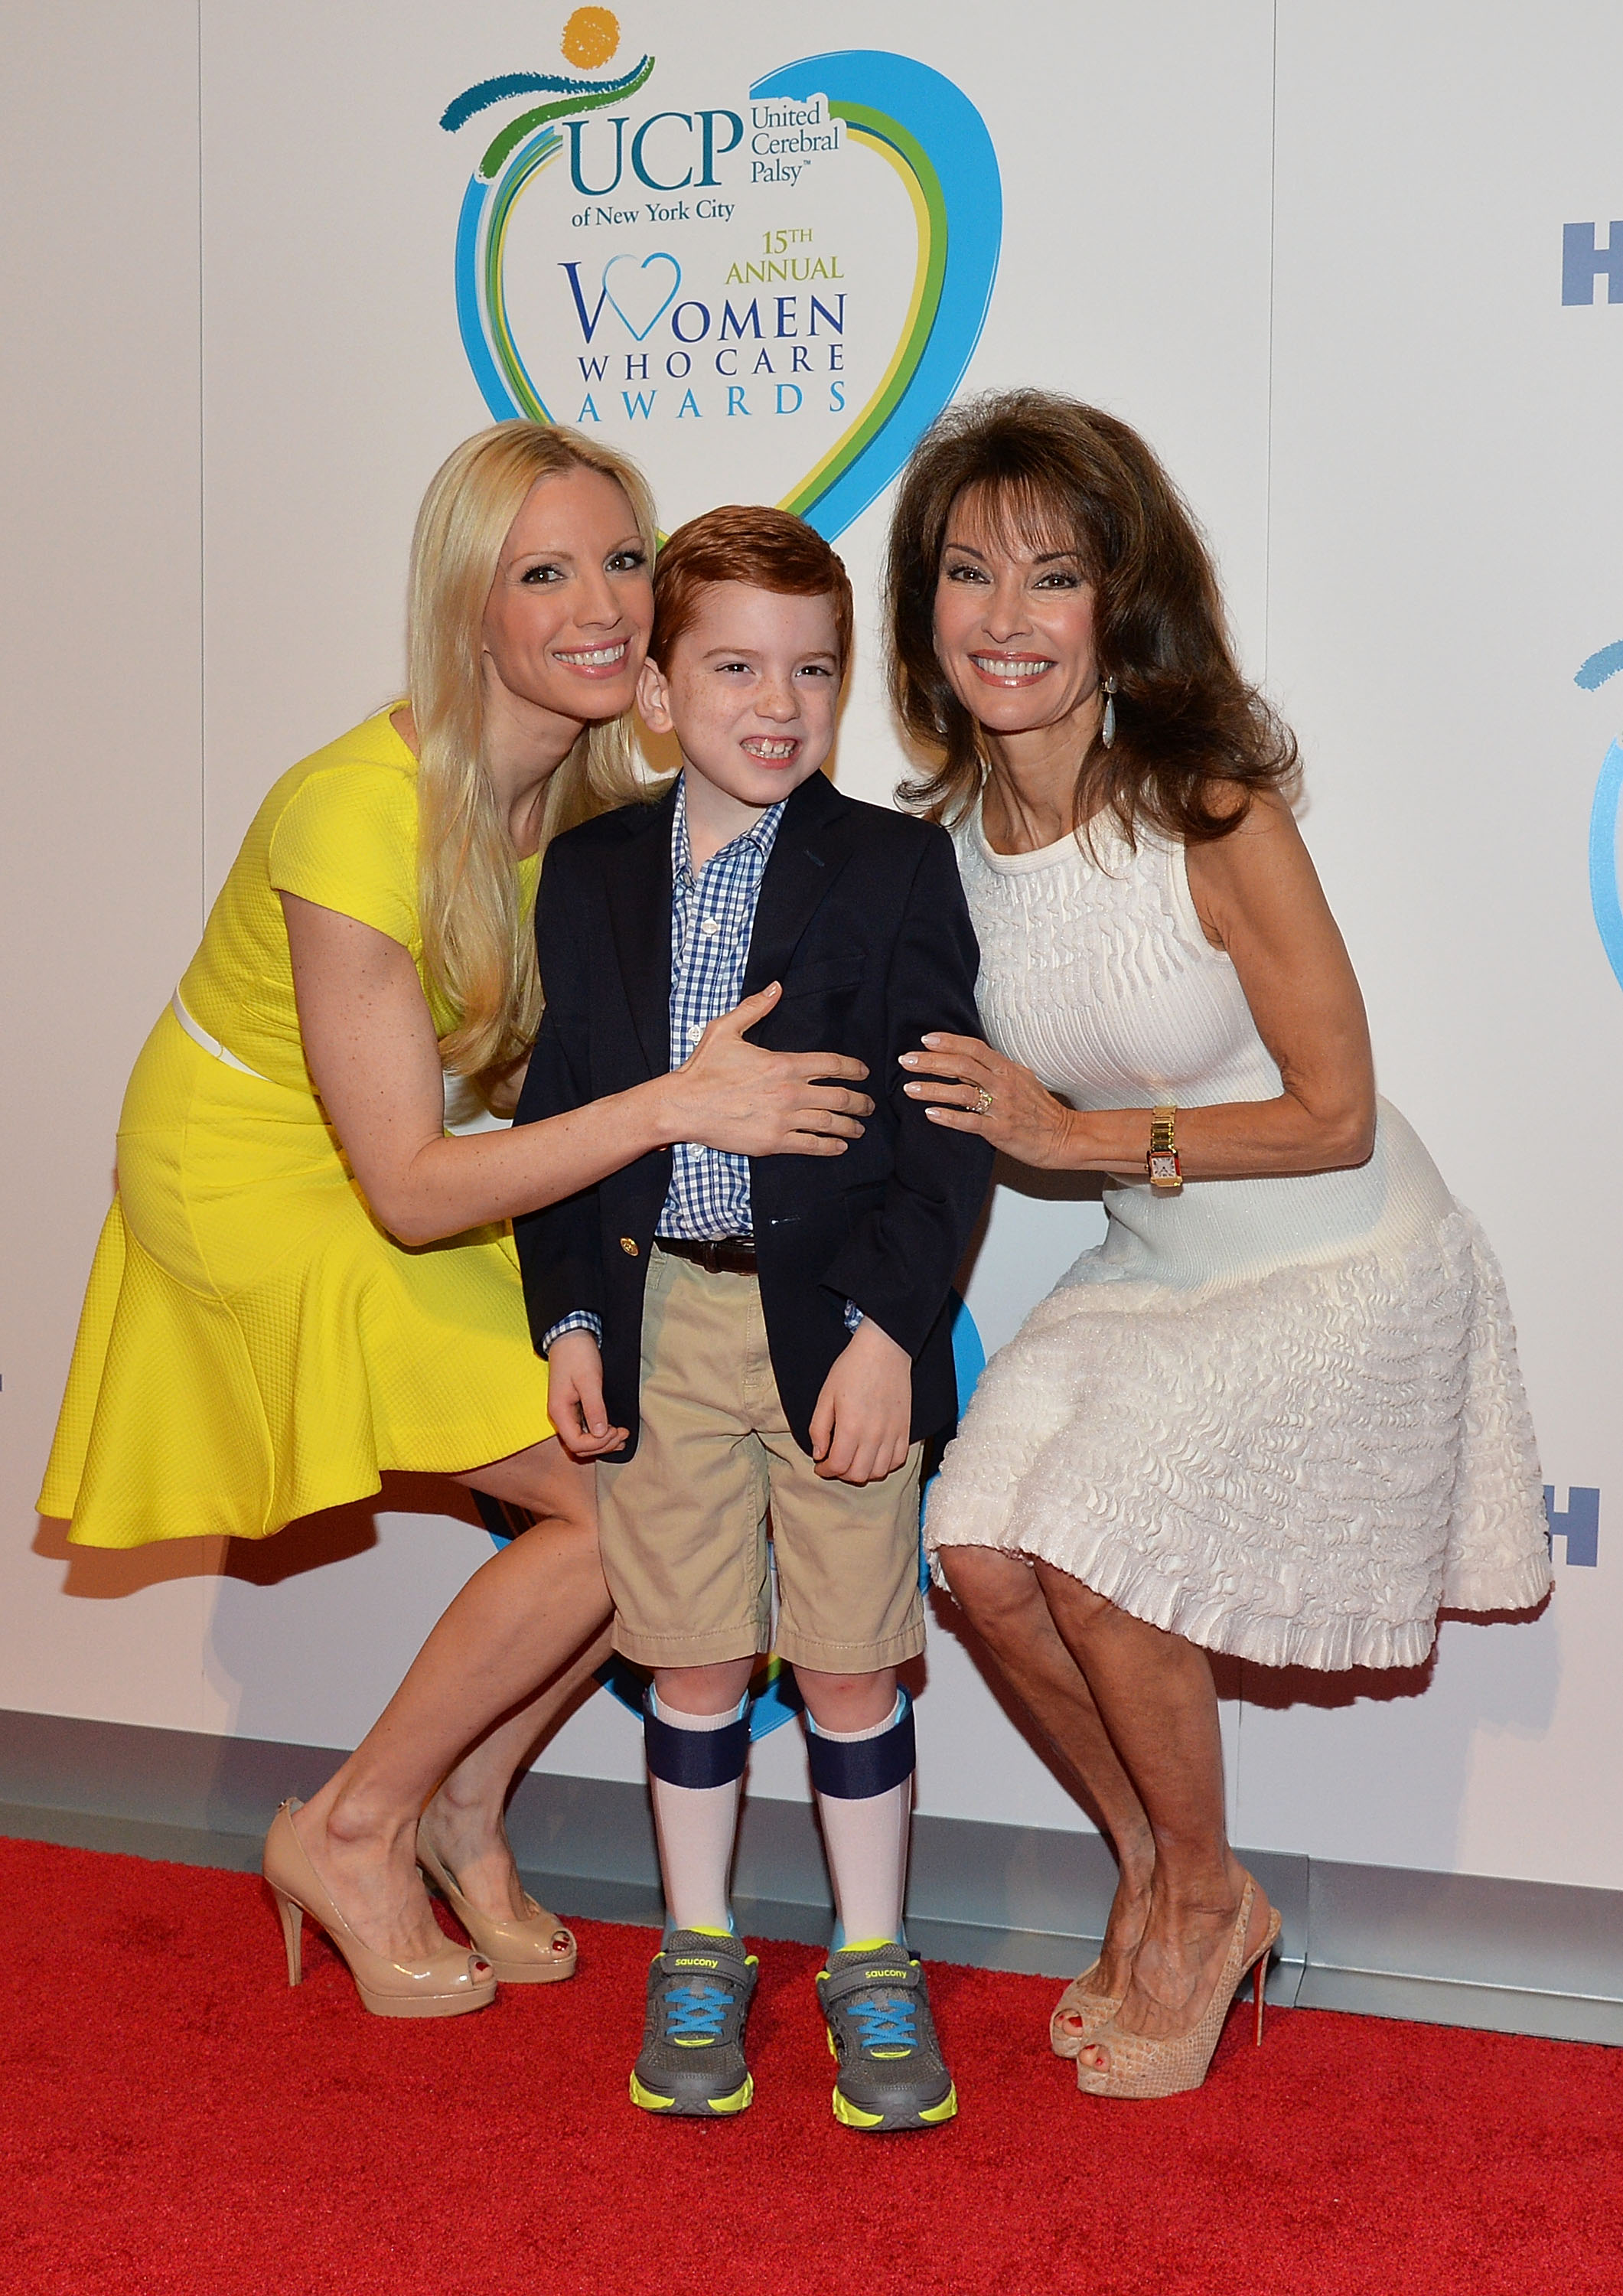 Liza Huber, Brendan Hesterberg, and Susan Lucci at the 15th Annual Women Who Care Awards Luncheon in New York City on May 9, 2016 | Source: Getty Images